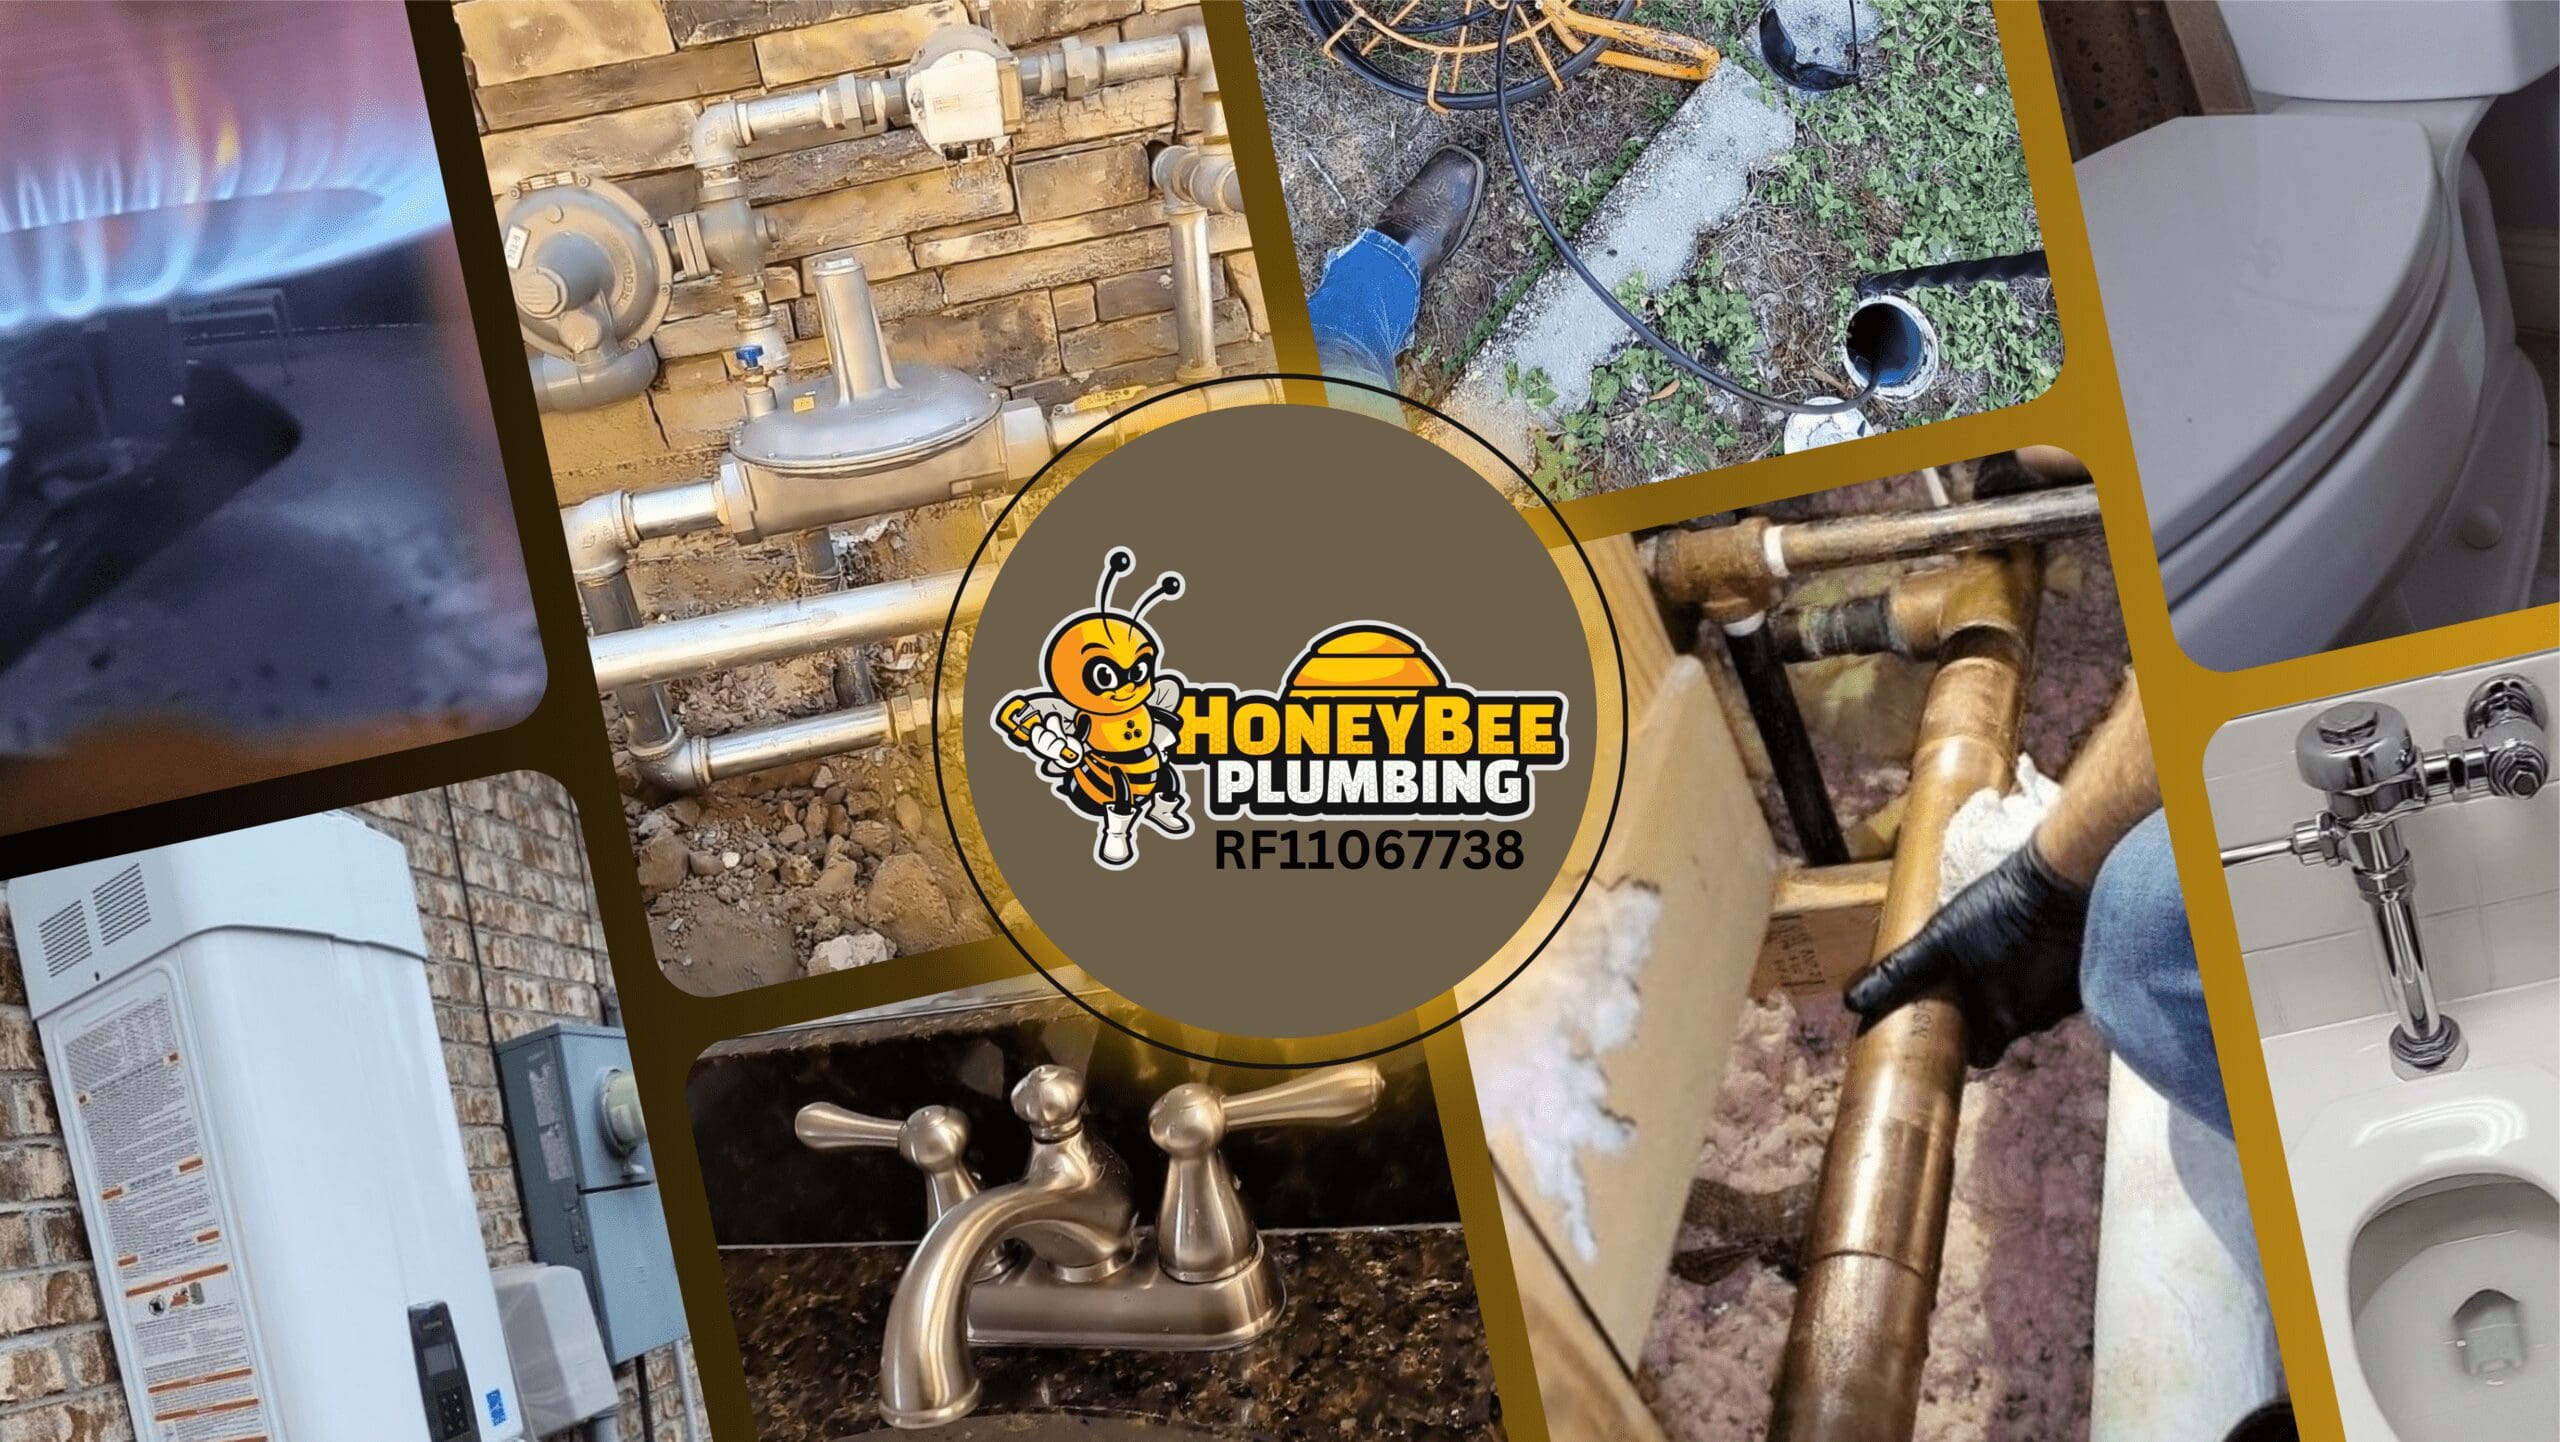 Collage of Honey Bee Plumbing services behind company logo.